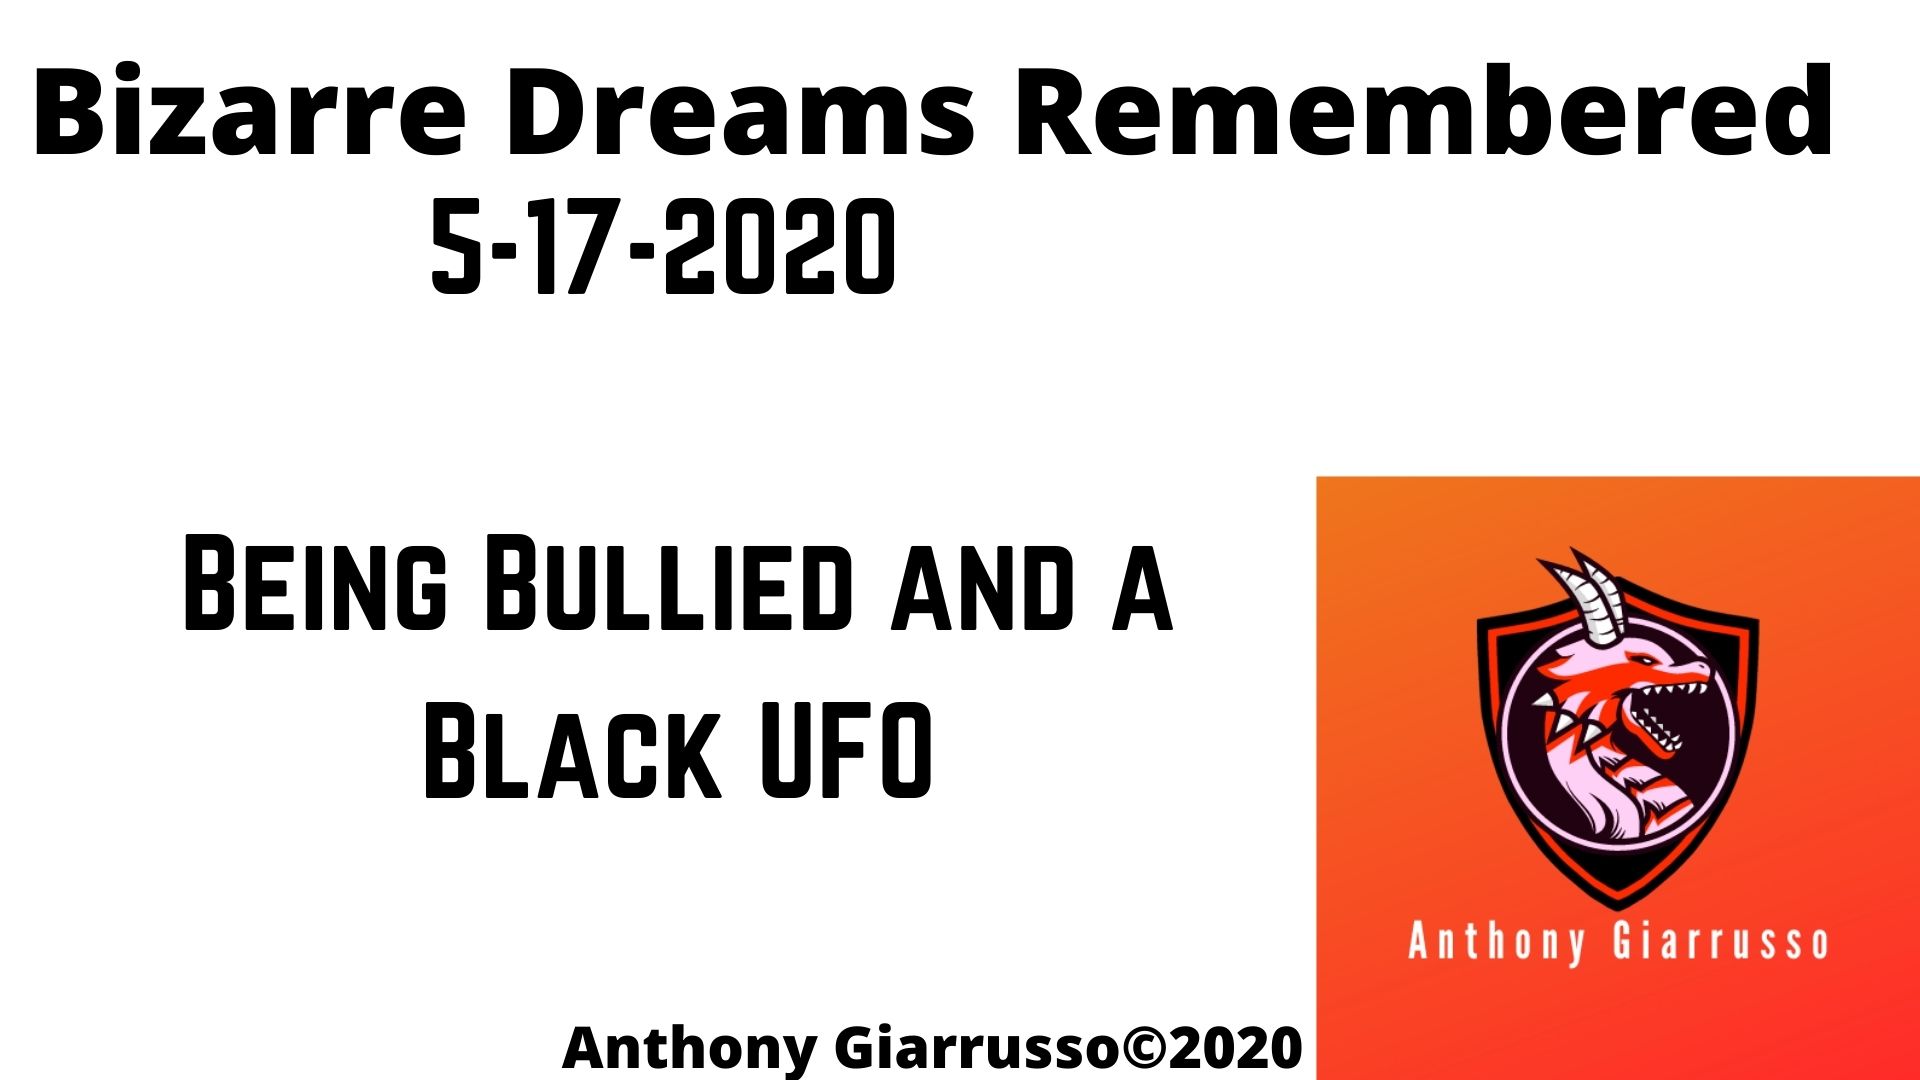 Bizarre Dreams Remembered 5-17-2020 Being Bullied and a Black UFO Anthony Giarrusso